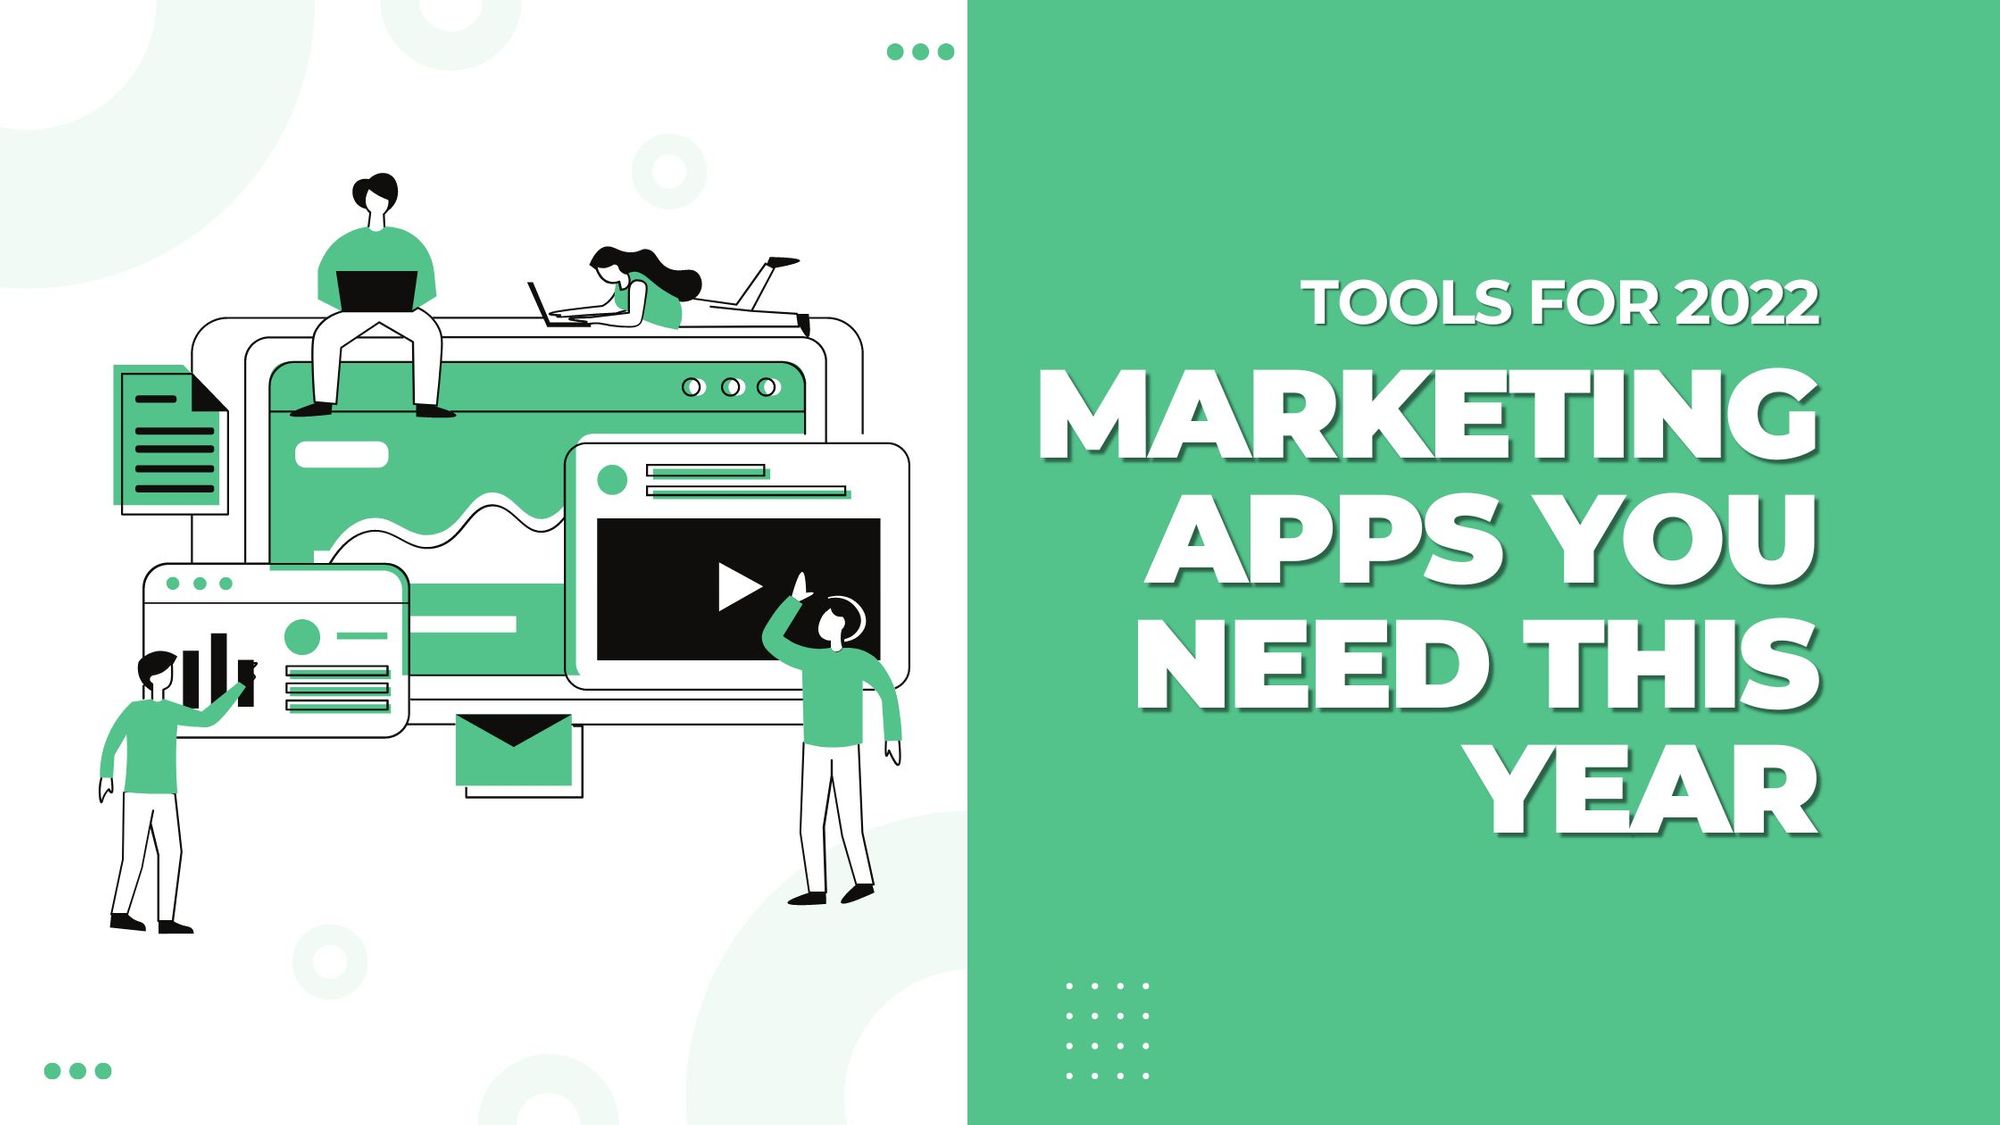 7 Best Marketing Tools To Get The Most Out Of Your Teams in 2022